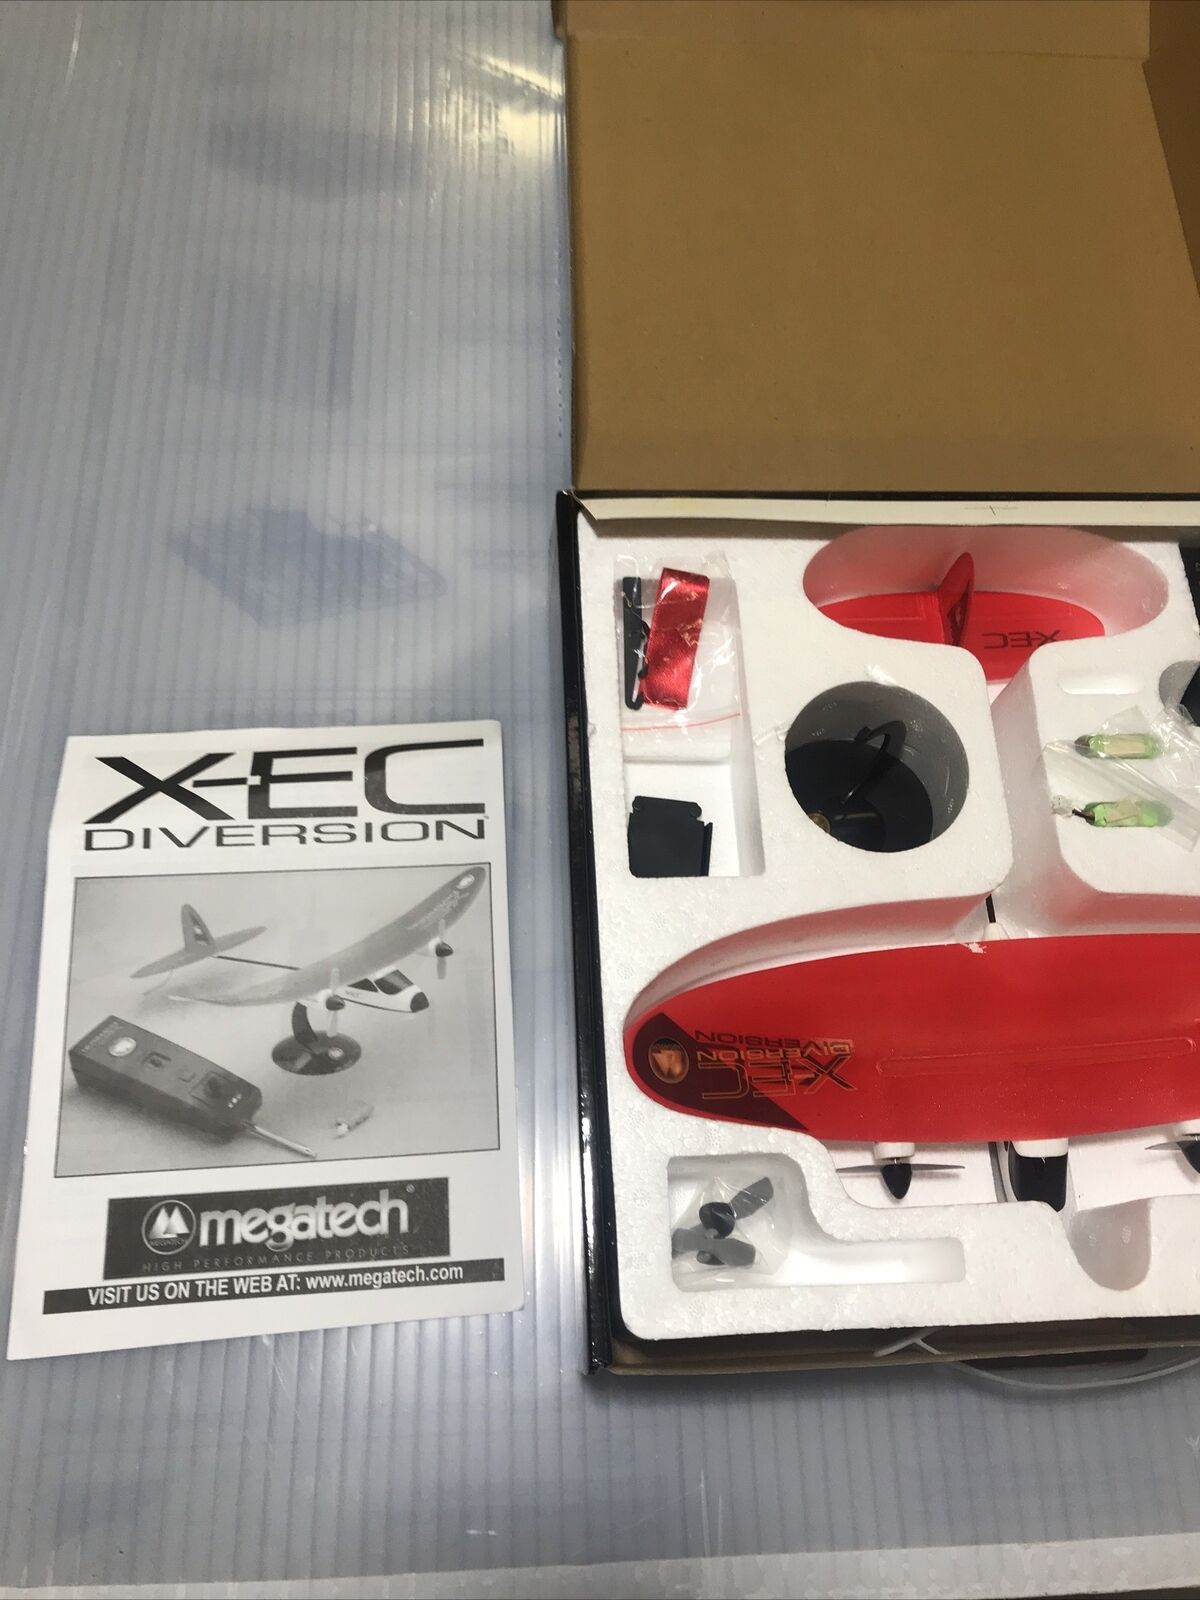 MEGATECH ANYWHERE DIVERSION RC AIRPLANE RADIO SHACK not tested